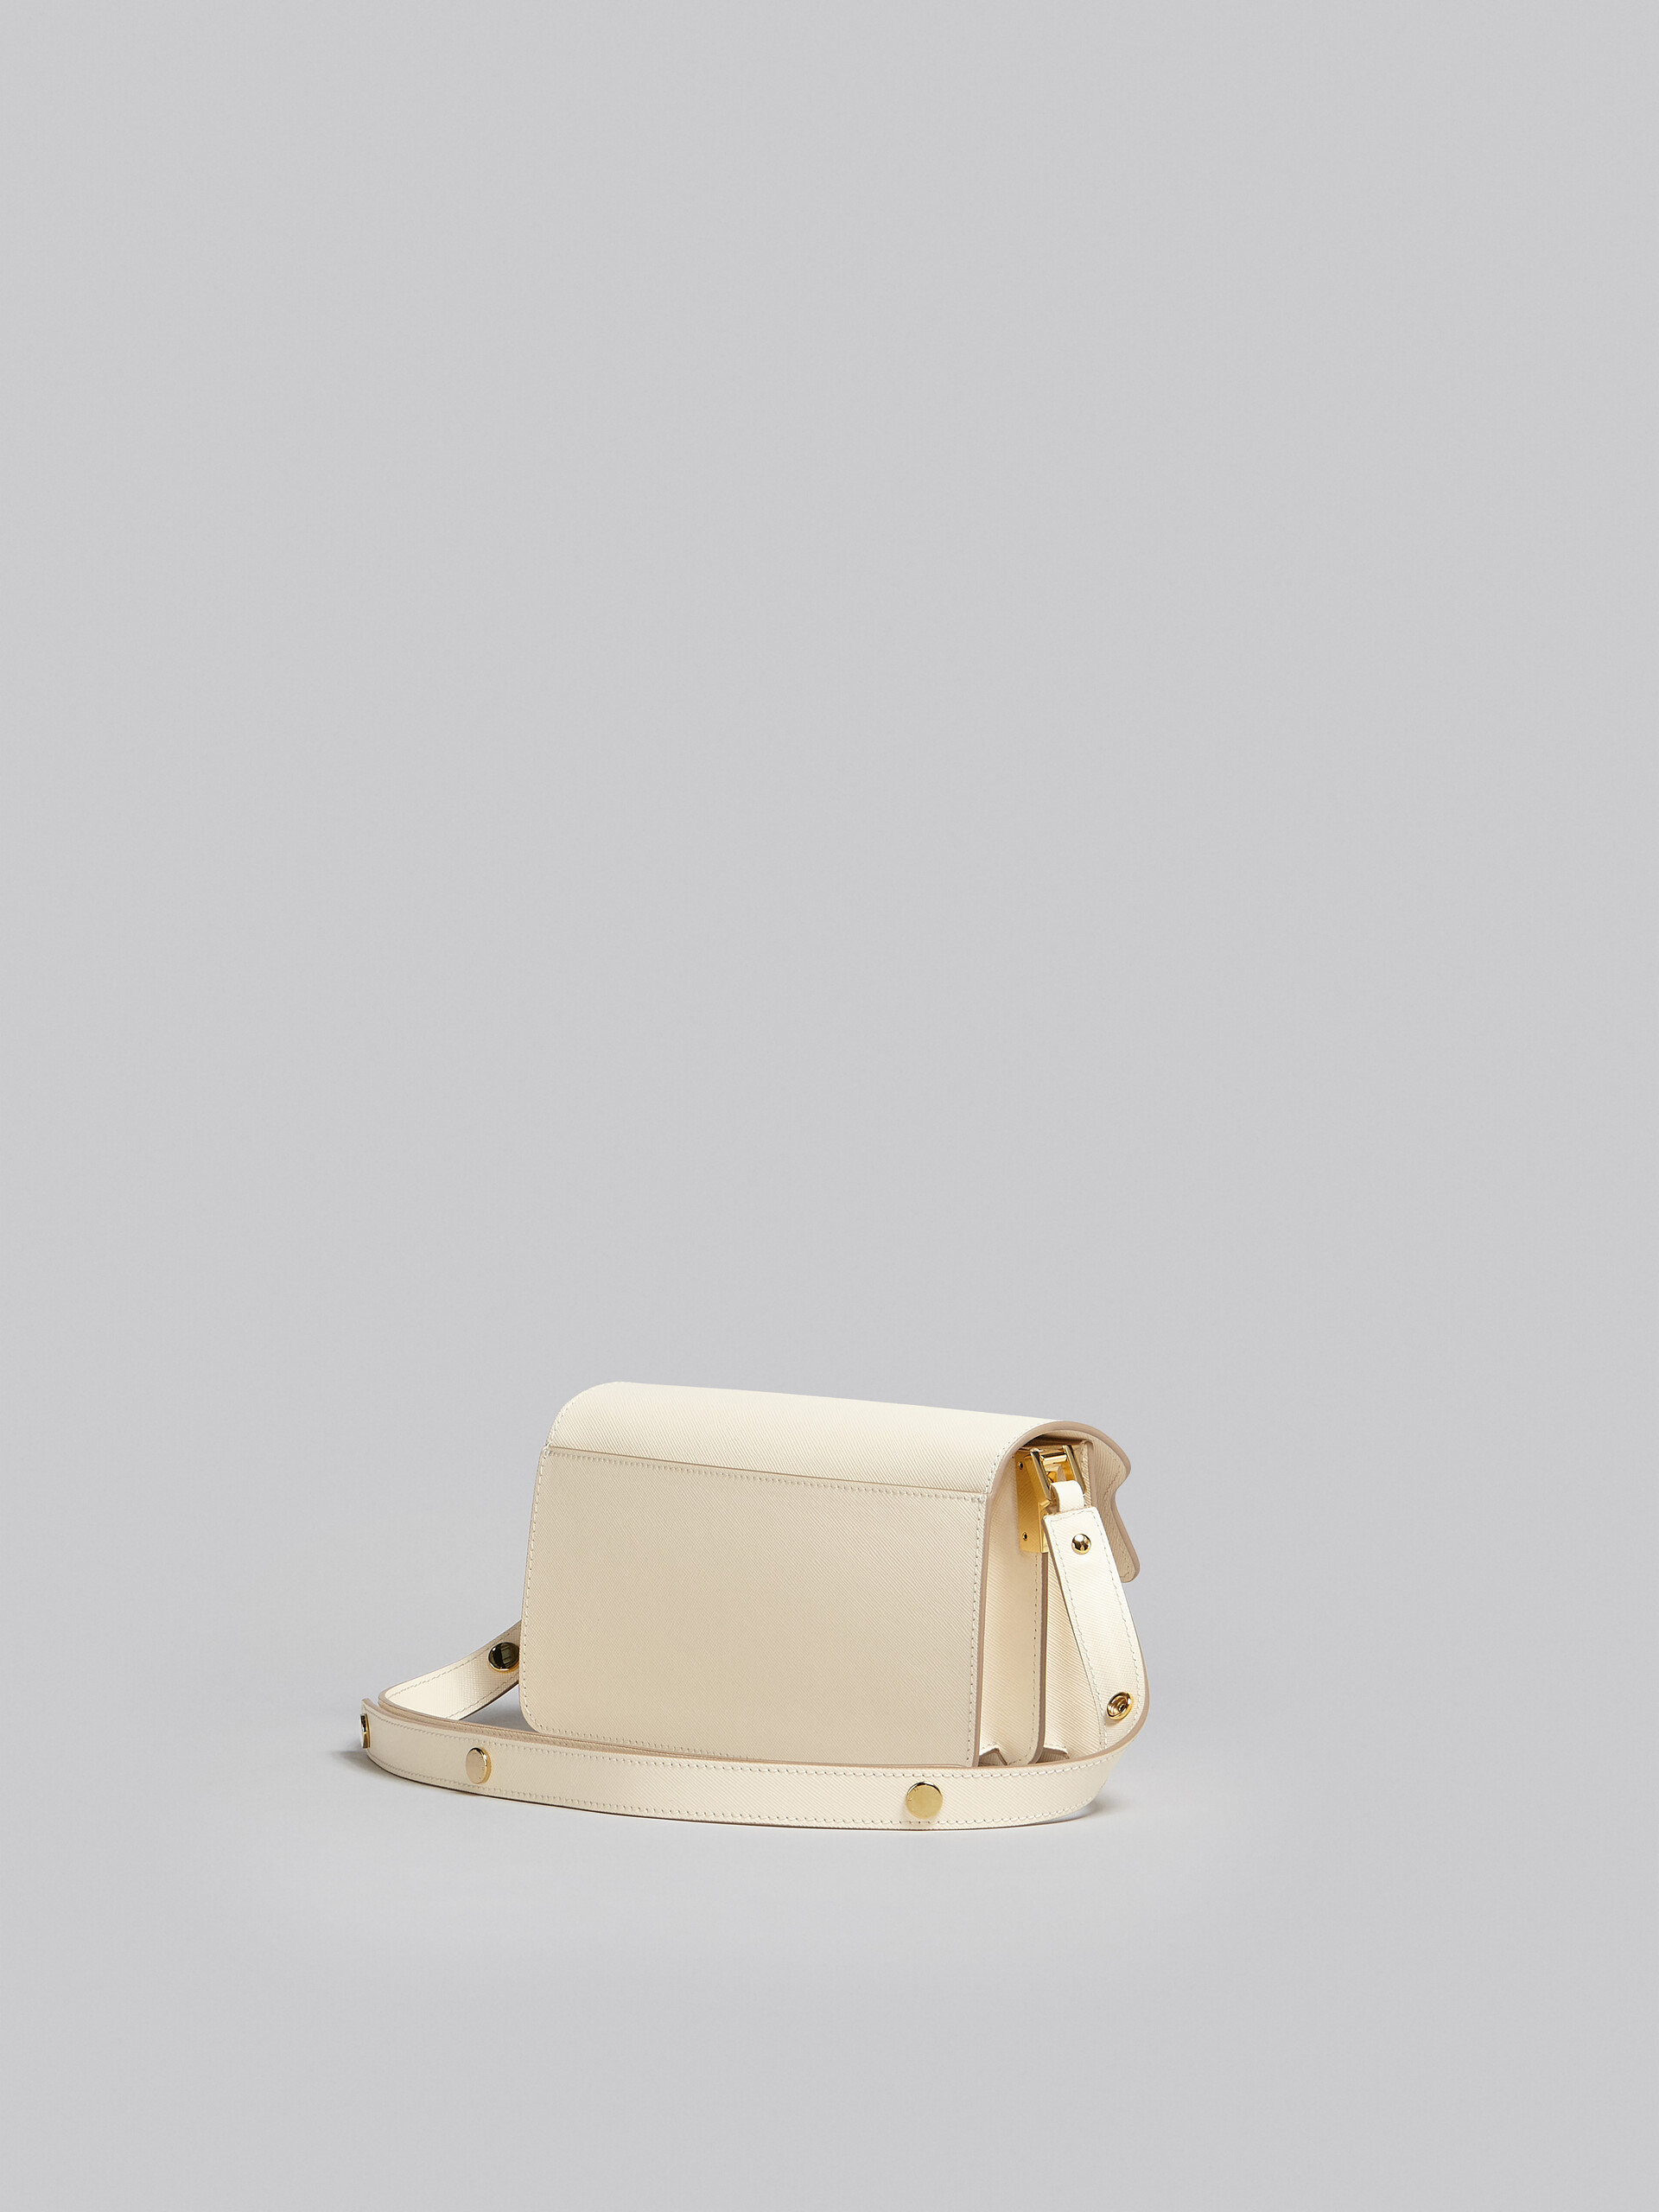 Trunk Bag E/W in white saffiano leather - Shoulder Bags - Image 3